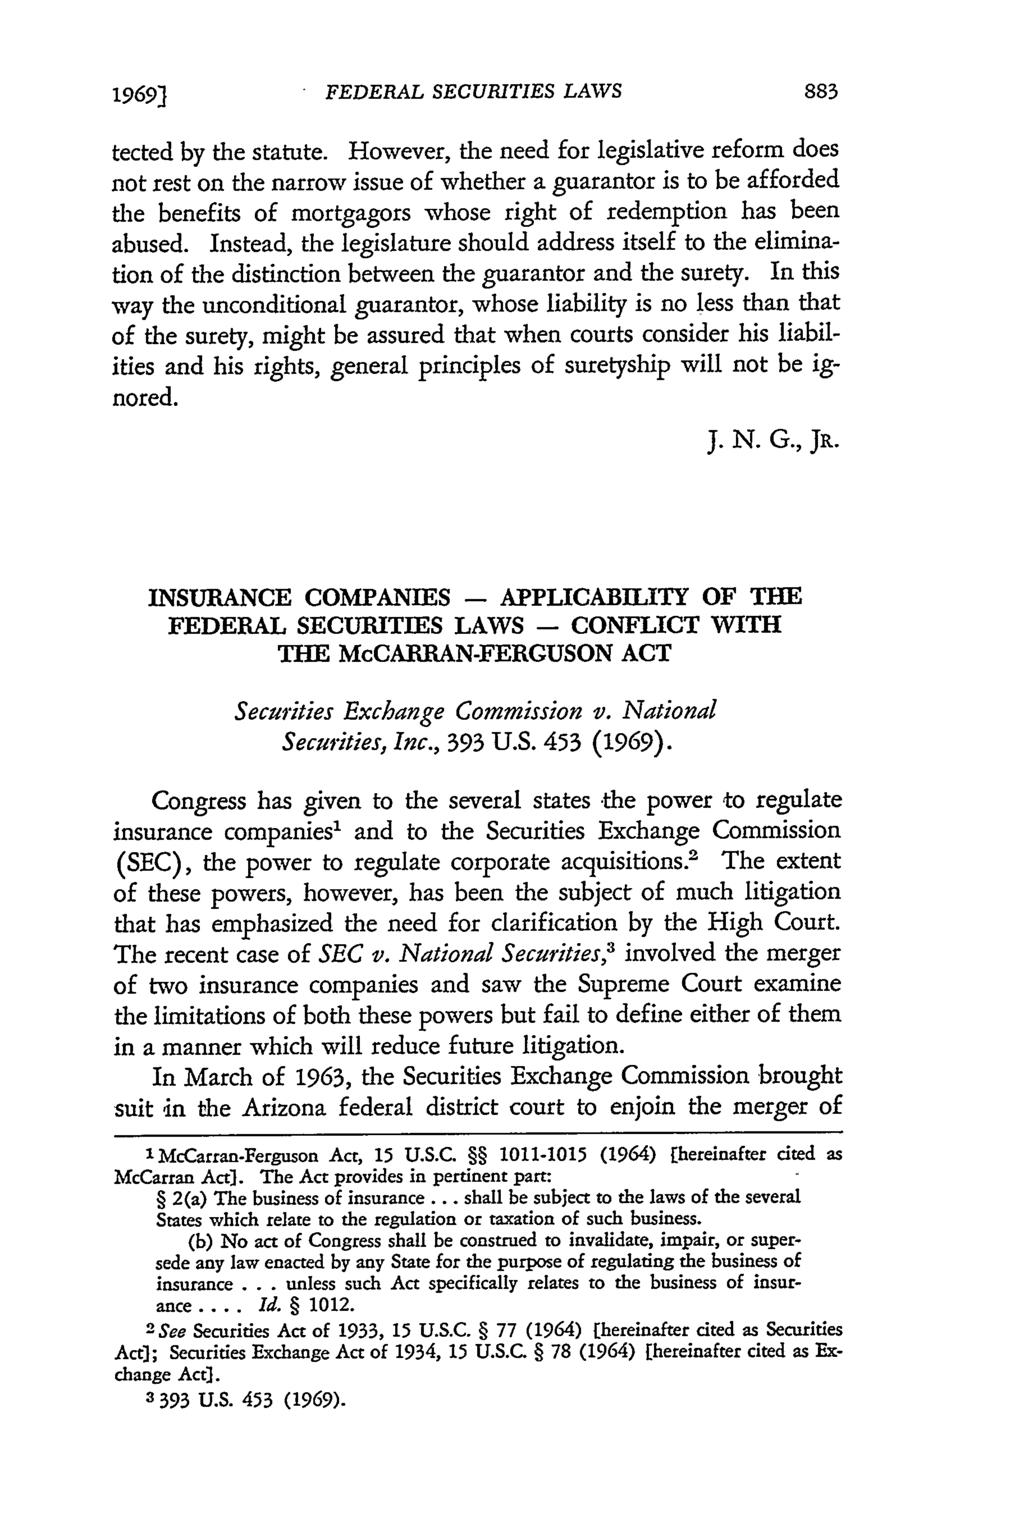 1969] FEDERAL SECURITIES LAWS tected by the statute.